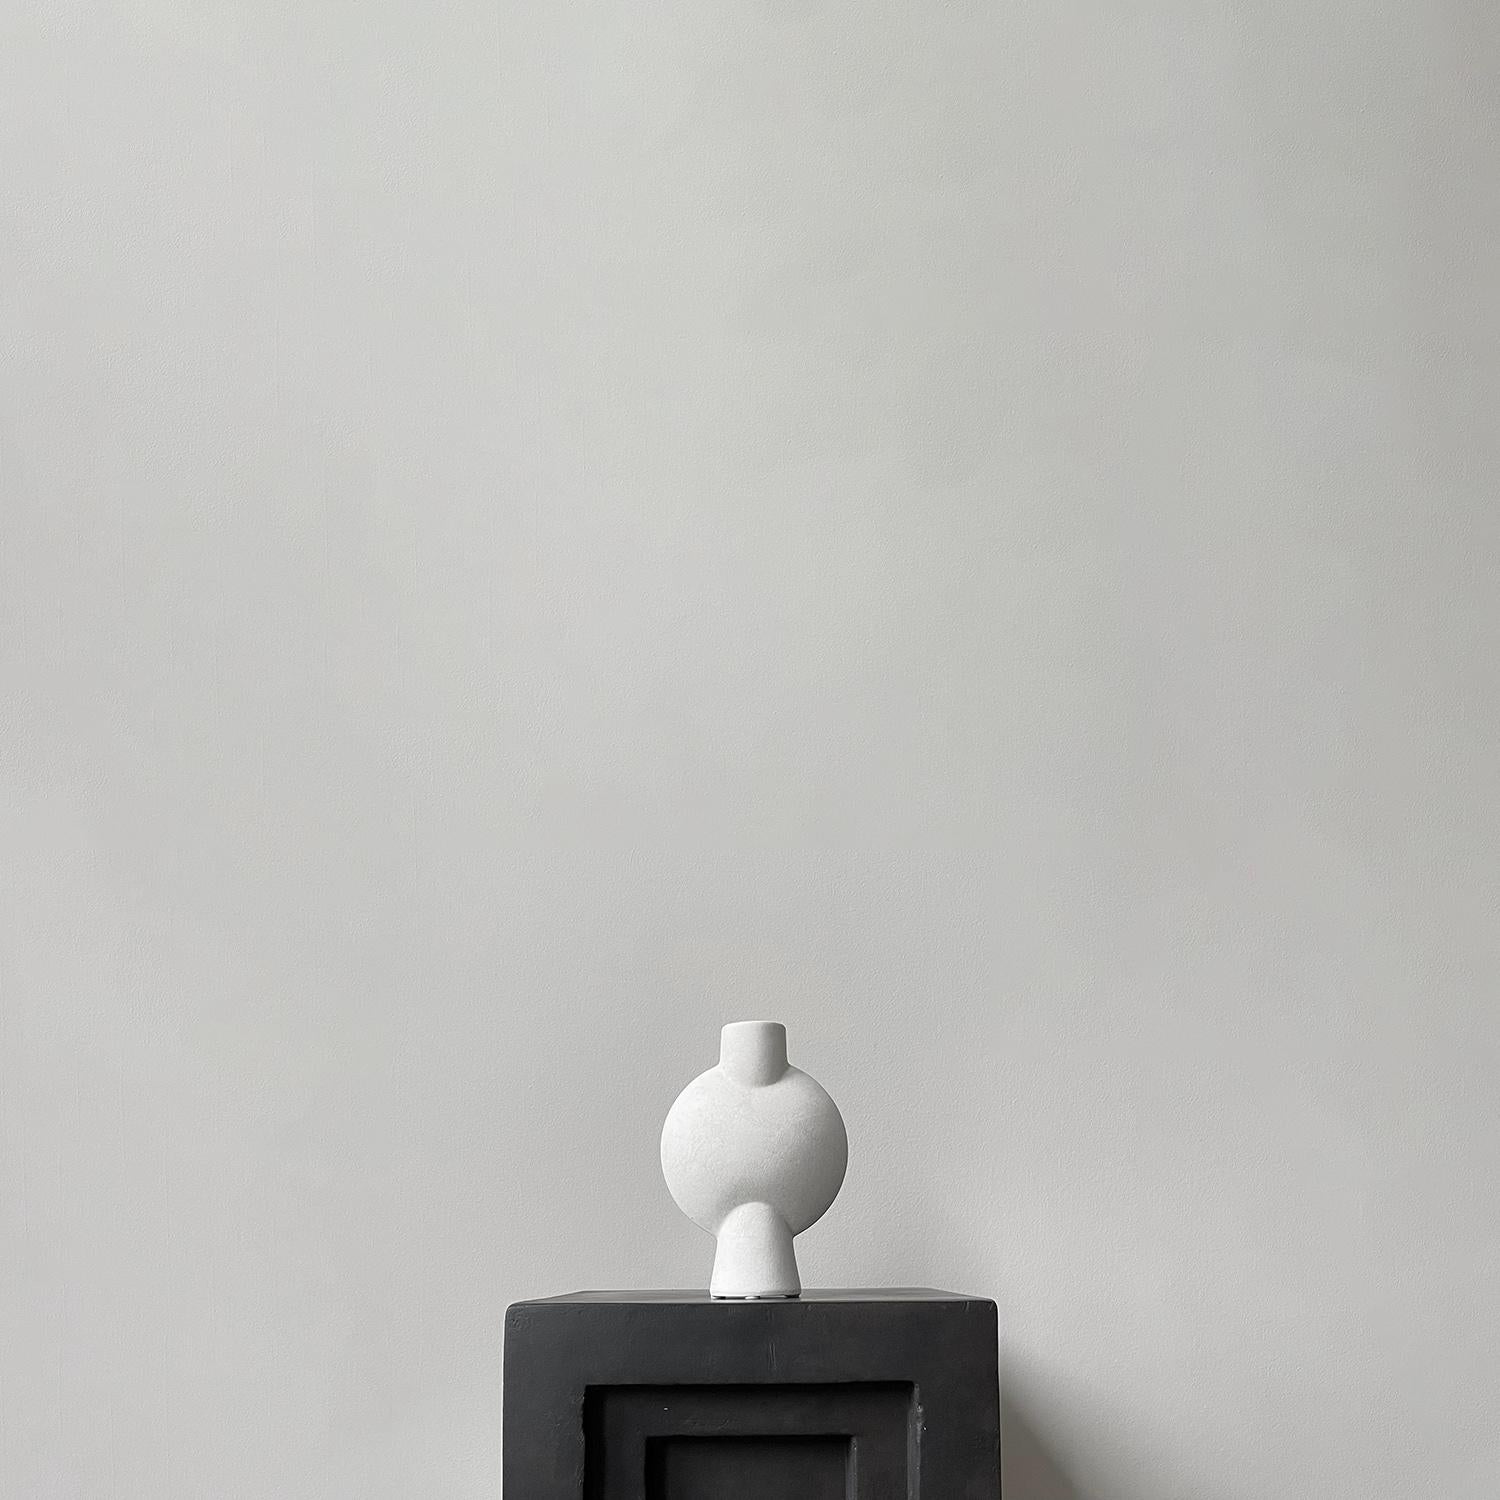 A set of 4 white mini sphere vase bubl by 101 Copenhagen
Designed by Kristian Sofus Hansen & Tommy Hyldahl
Dimensions: L 13 / W 6 / H 18 CM
Materials: Ceramic

The Sphere collection celebrates unique silhouettes and textures that makes an